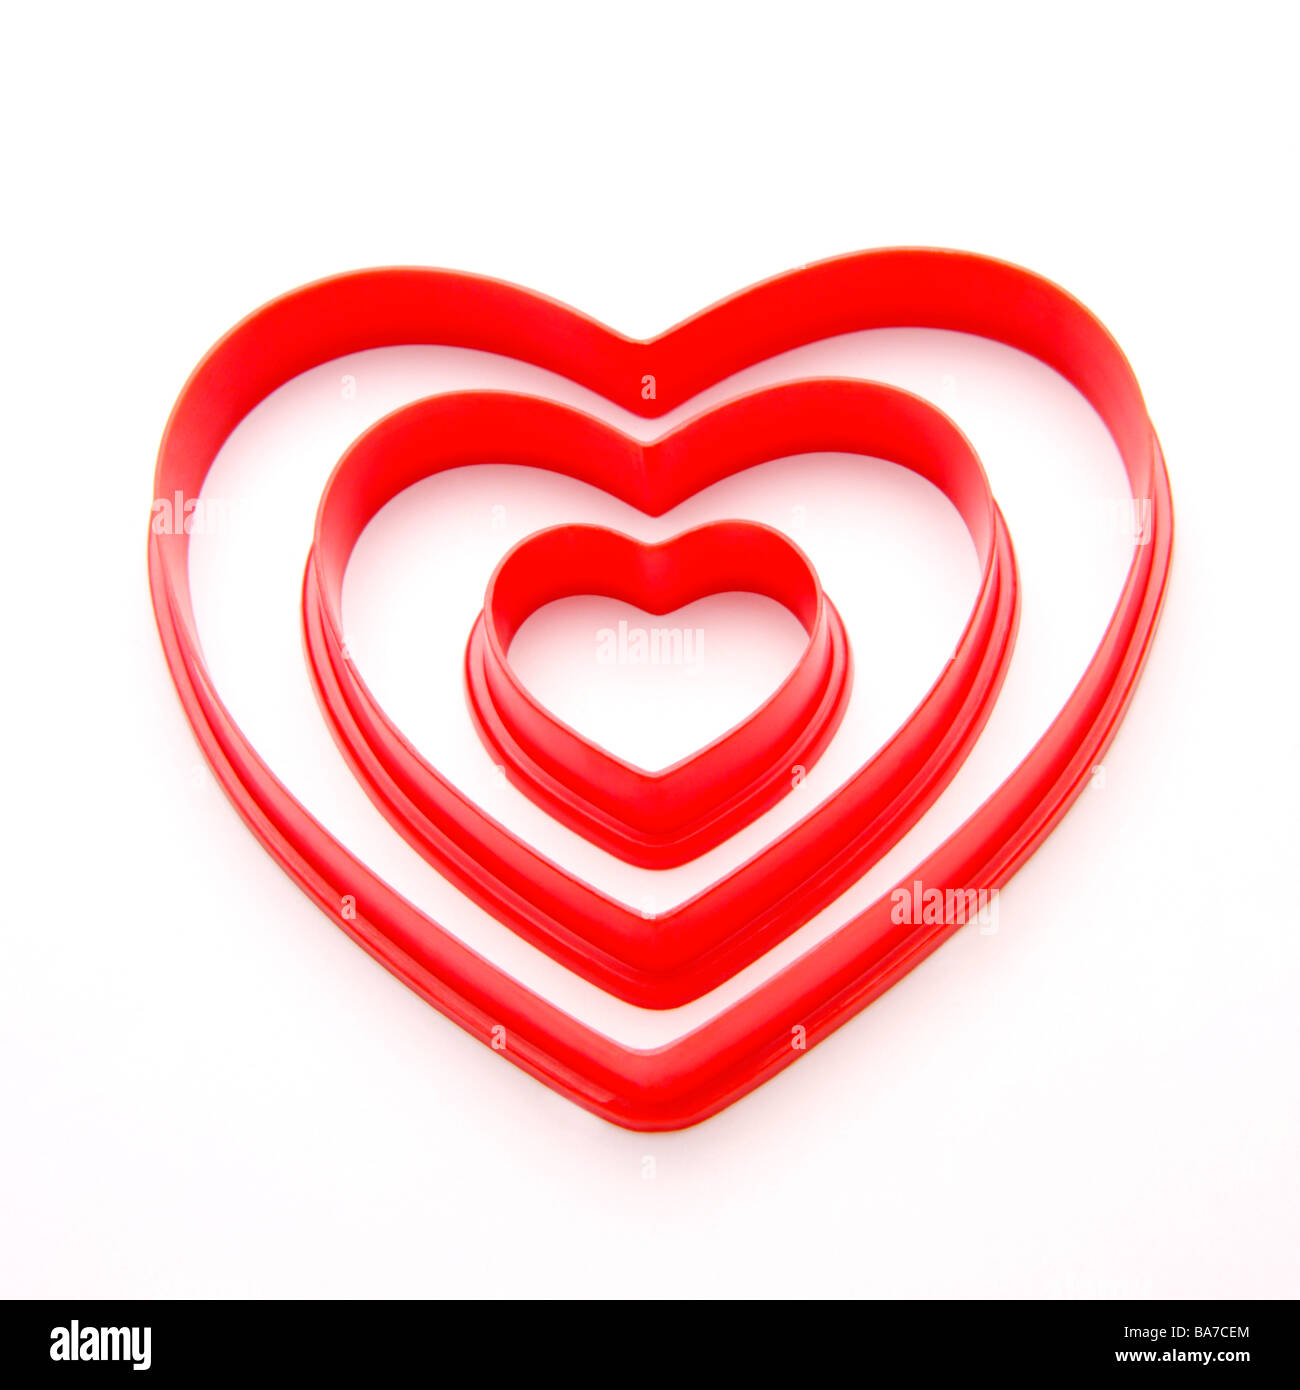 Three different sized heart shaped objects Stock Photo